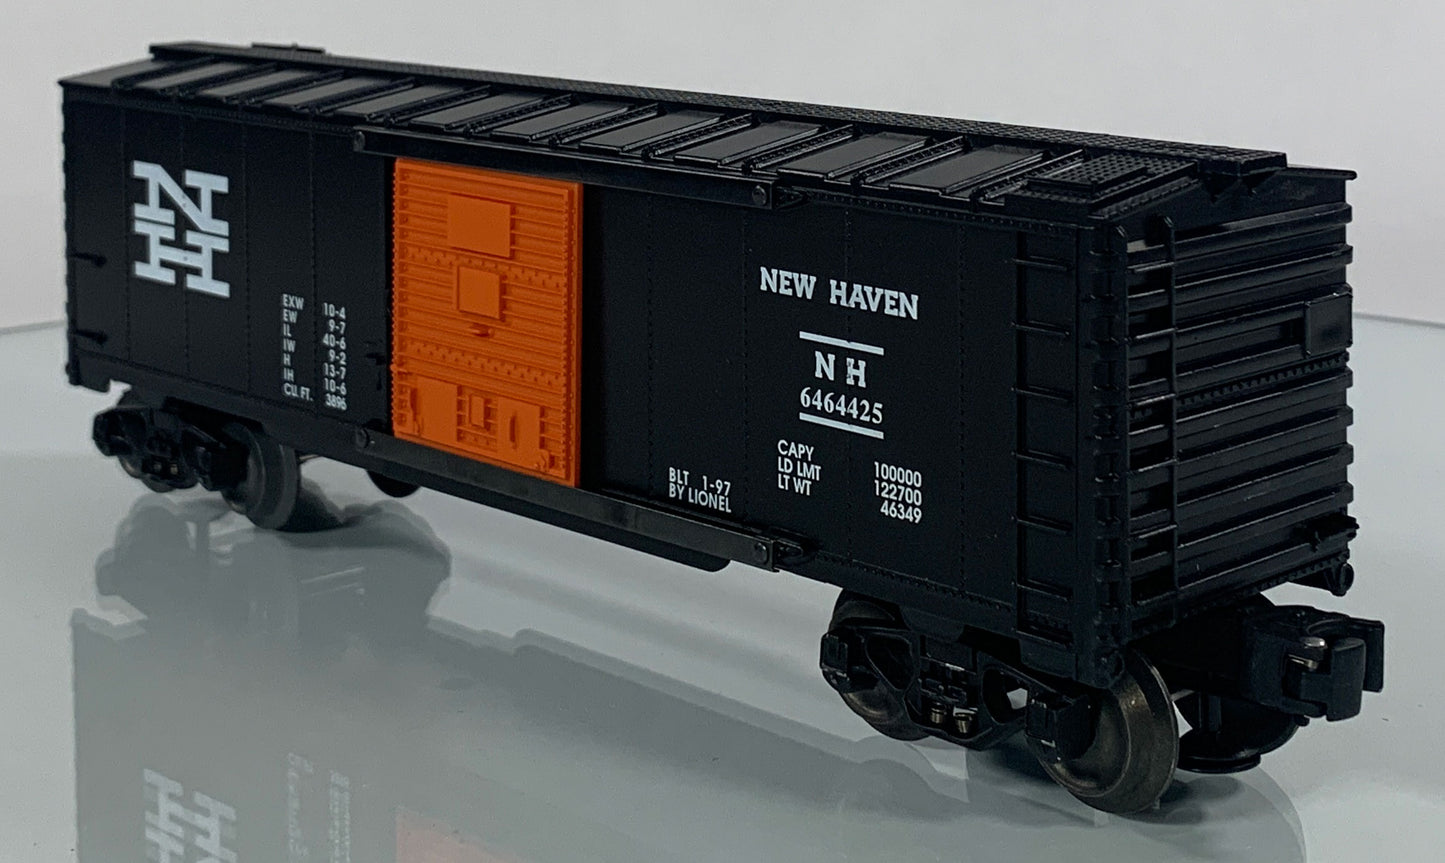 LIONEL • O GAUGE • 1995 New Haven [6464-425] Boxcar 6-19295 • NEW OLD STOCK